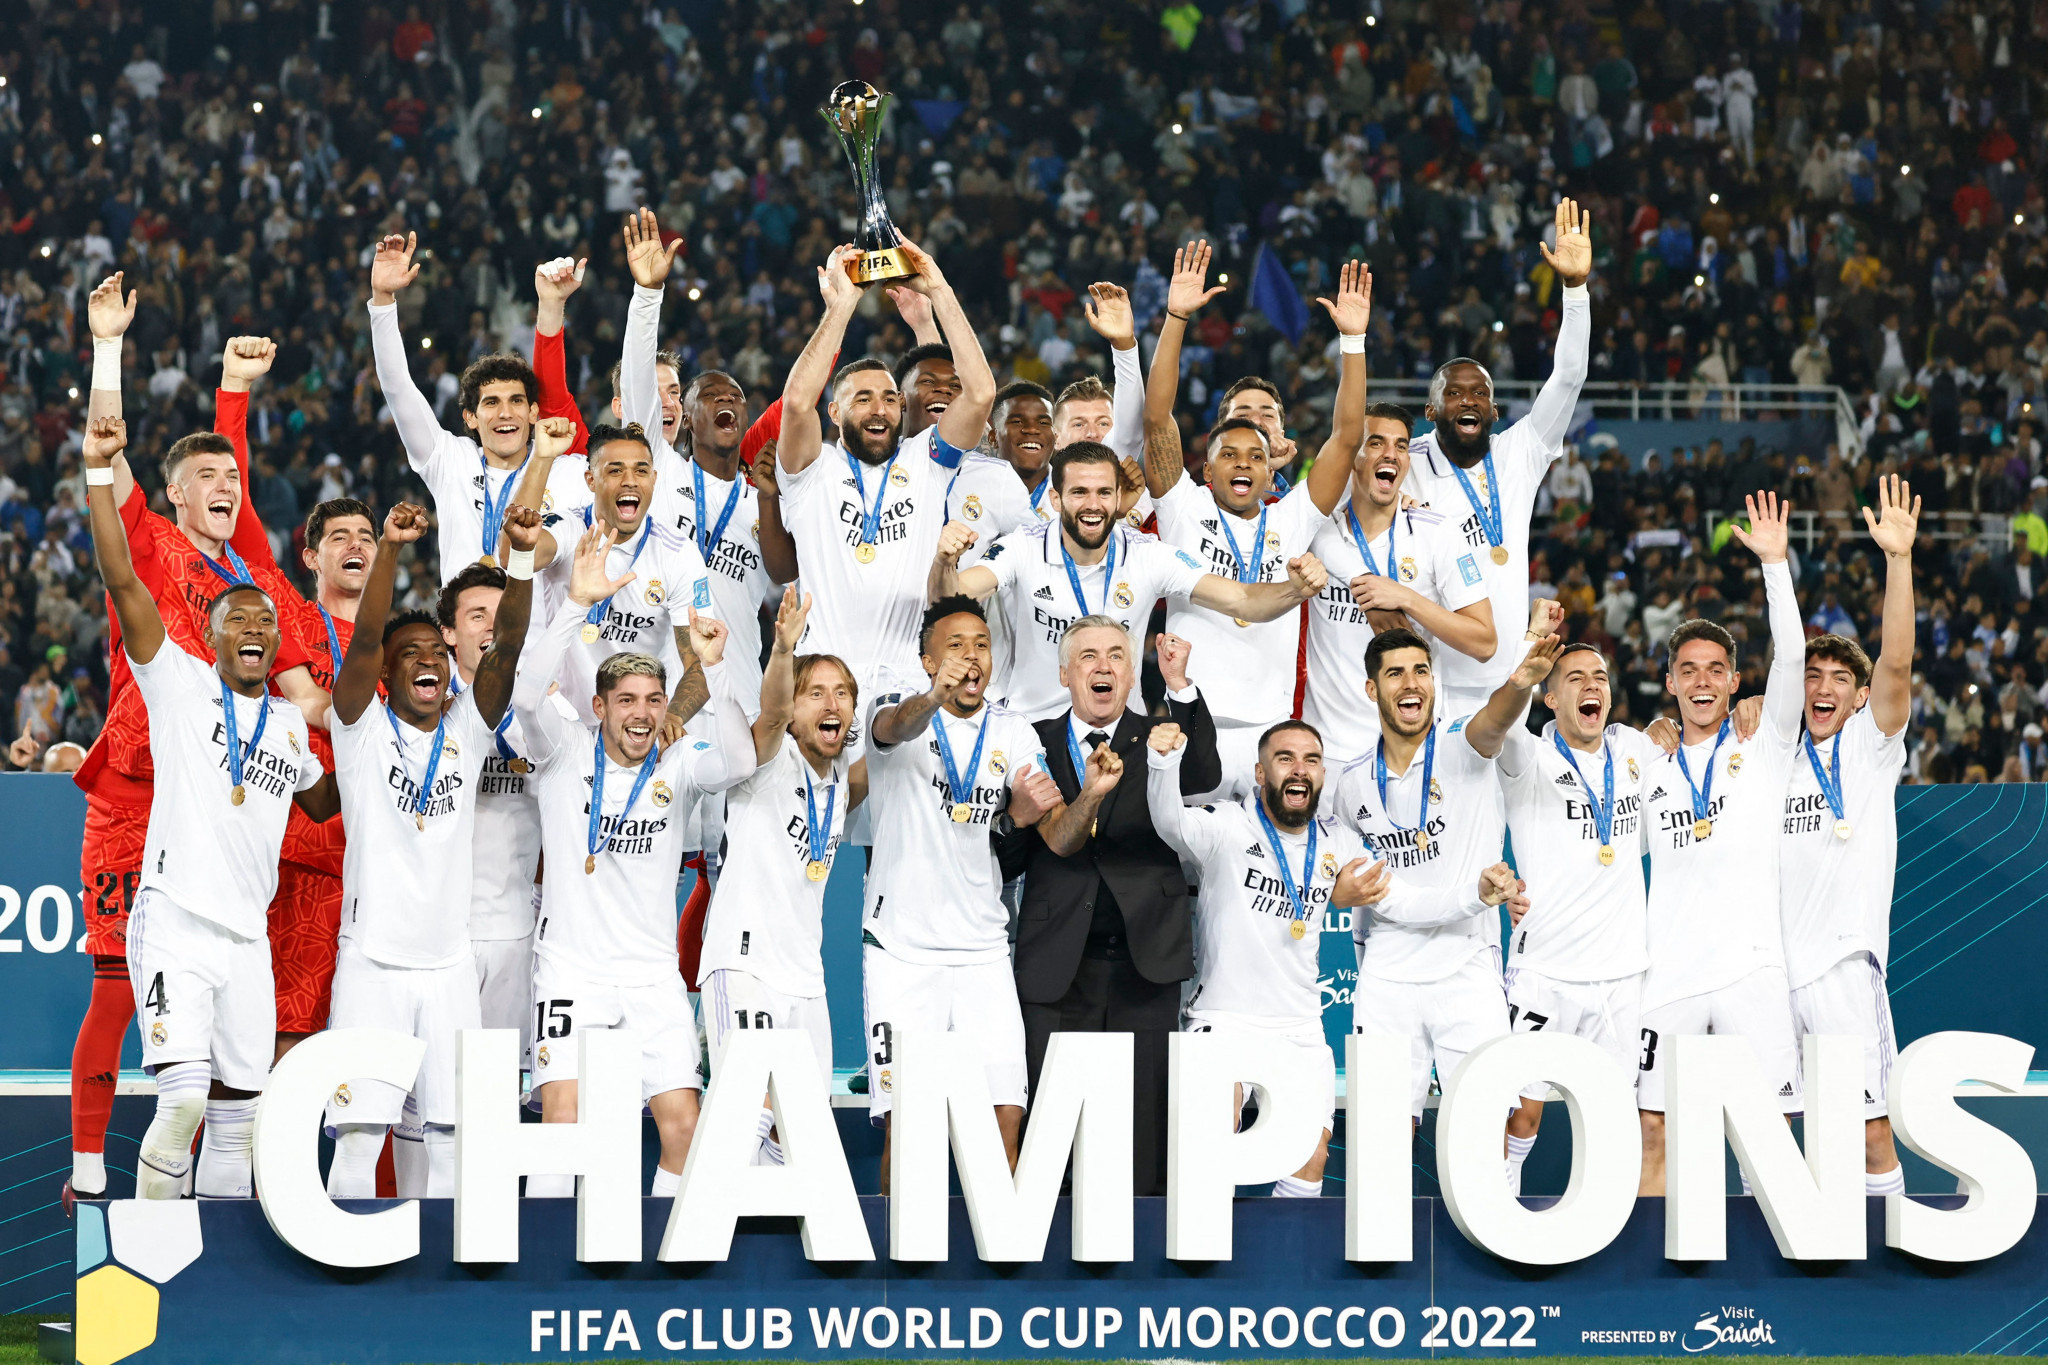 Real Madrid are defending FIFA Club World Cup champions, having won last year's edition in Morocco ©Getty Images